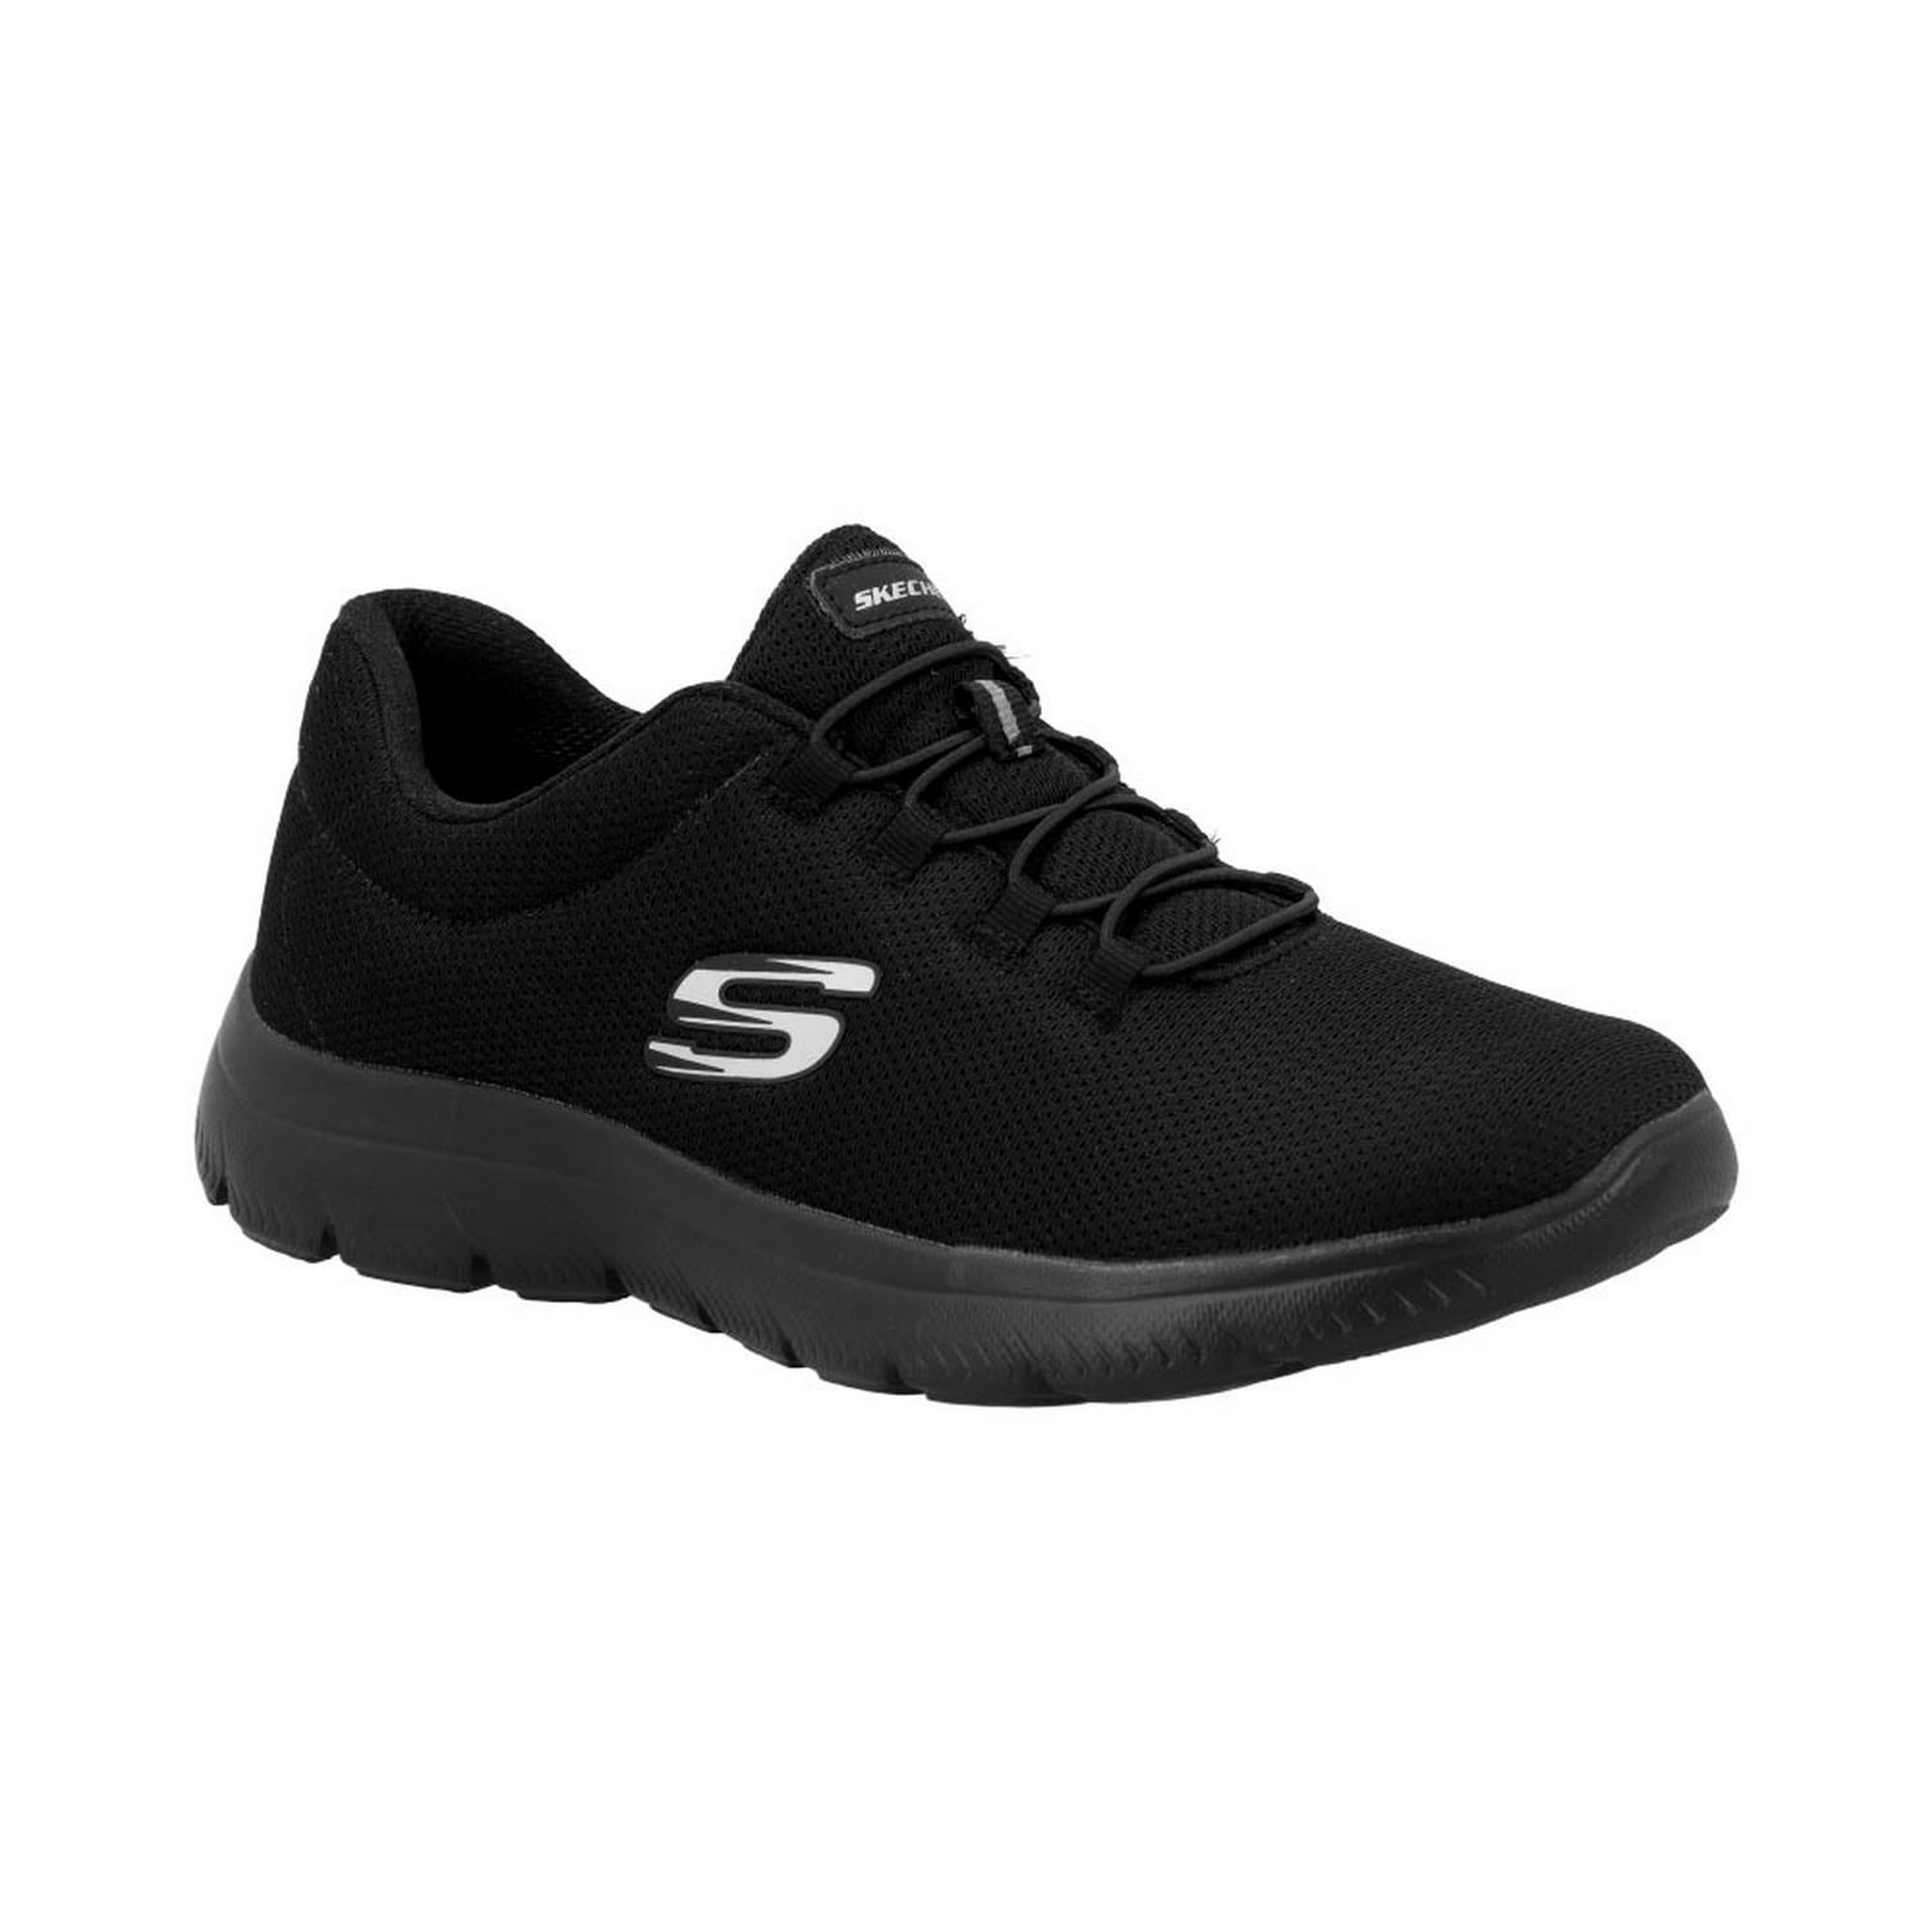 S921 Exprit Tenis Mujer Fitness Negro Talla 24 Color Negro Blanco